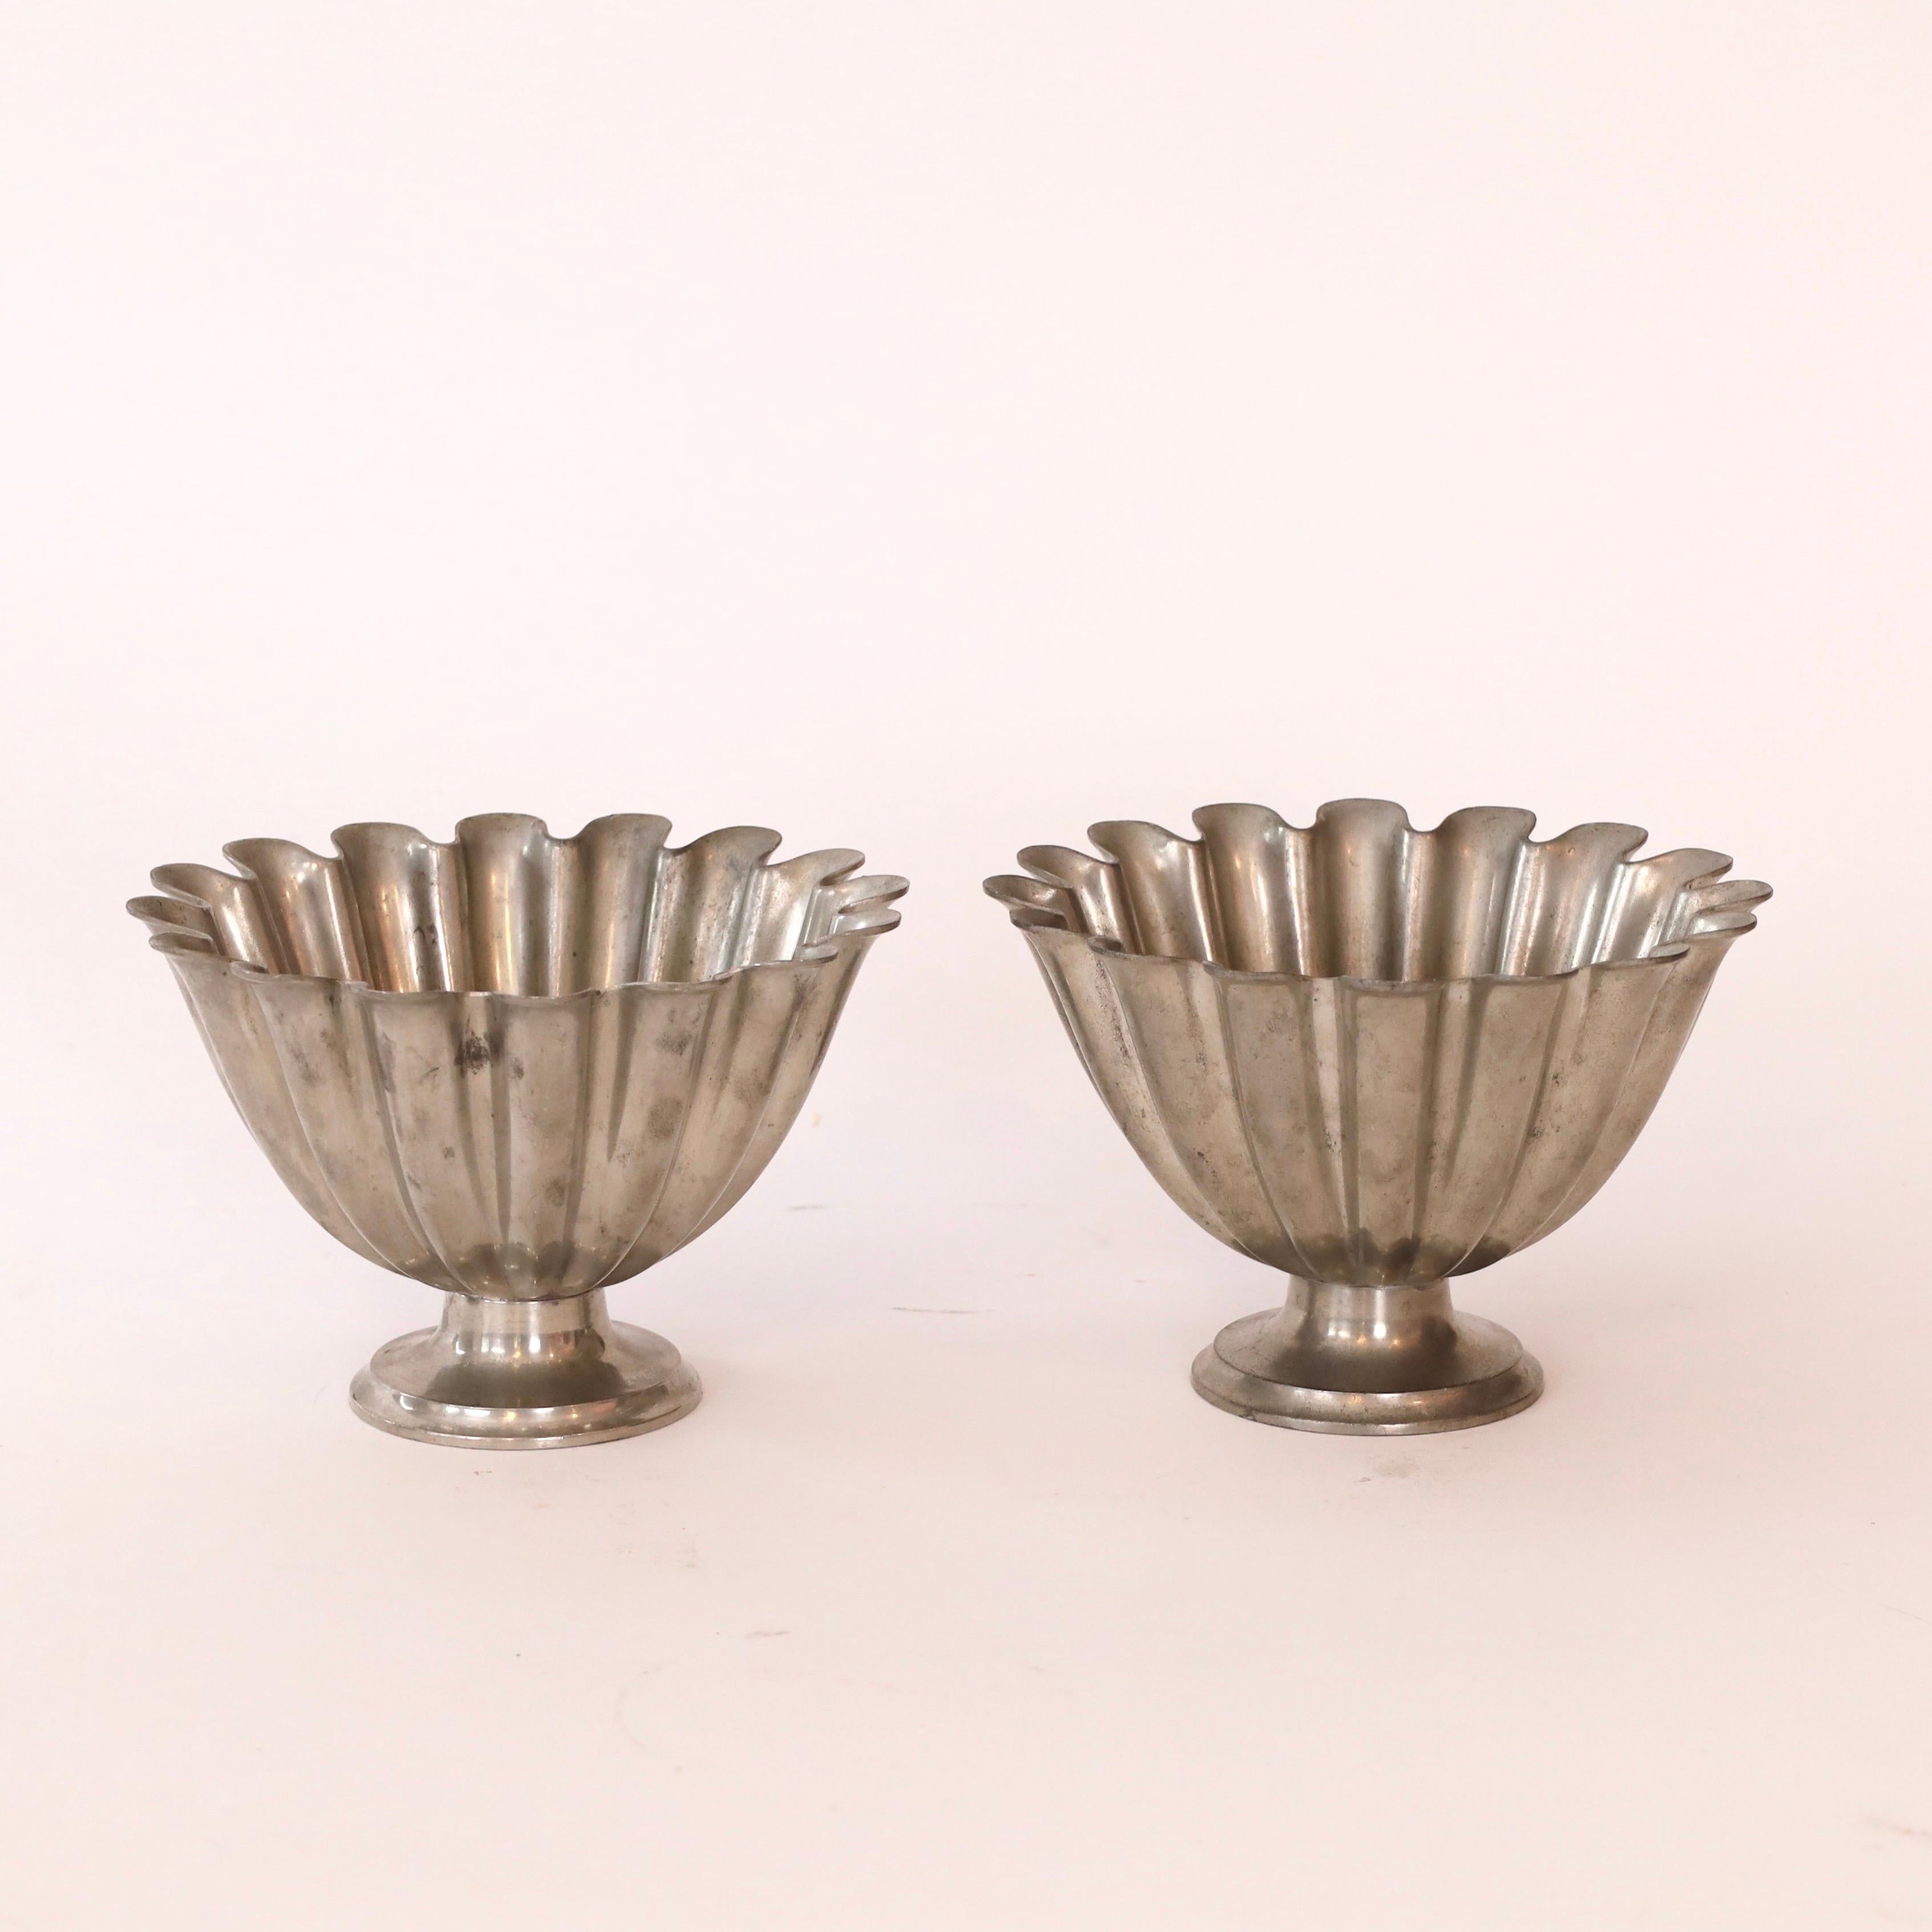 Early 20th Century Pair of Scalloped pedestal pewter bowls by Just Andersen 1920s, Denmark For Sale